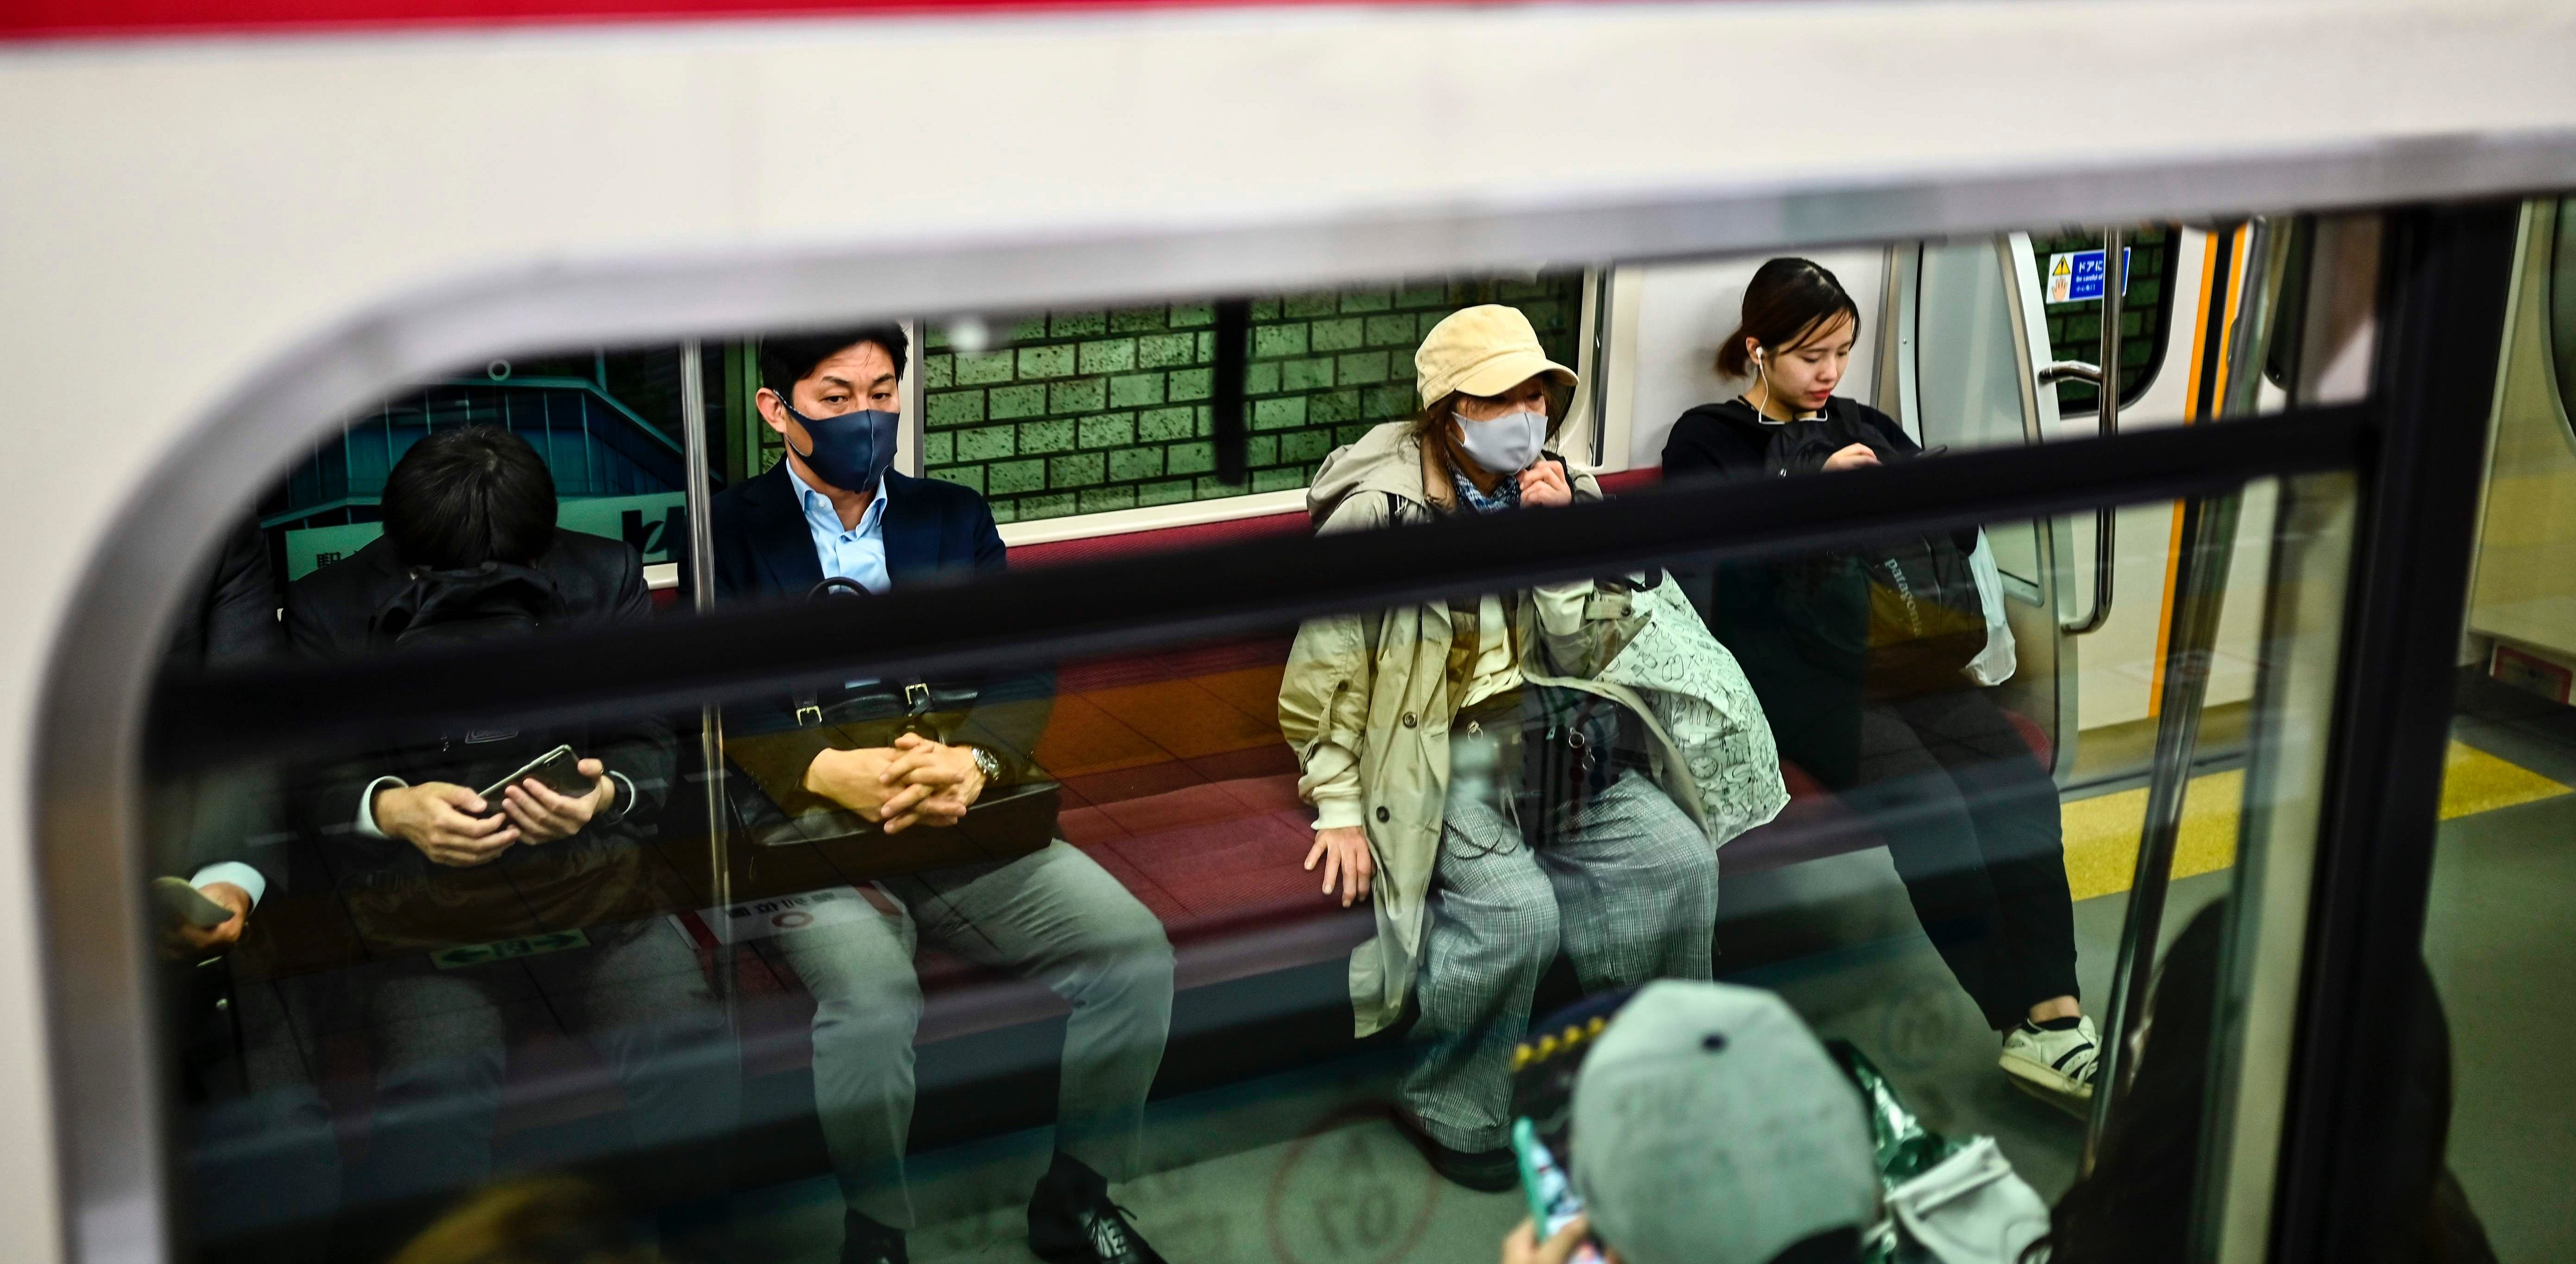 Japan has so far taken a comparatively relaxed approach to coronavirus restrictions, with even a nationwide state of emergency in the spring carrying no obligation for businesses to close or people to stay at home. Credit: AFP